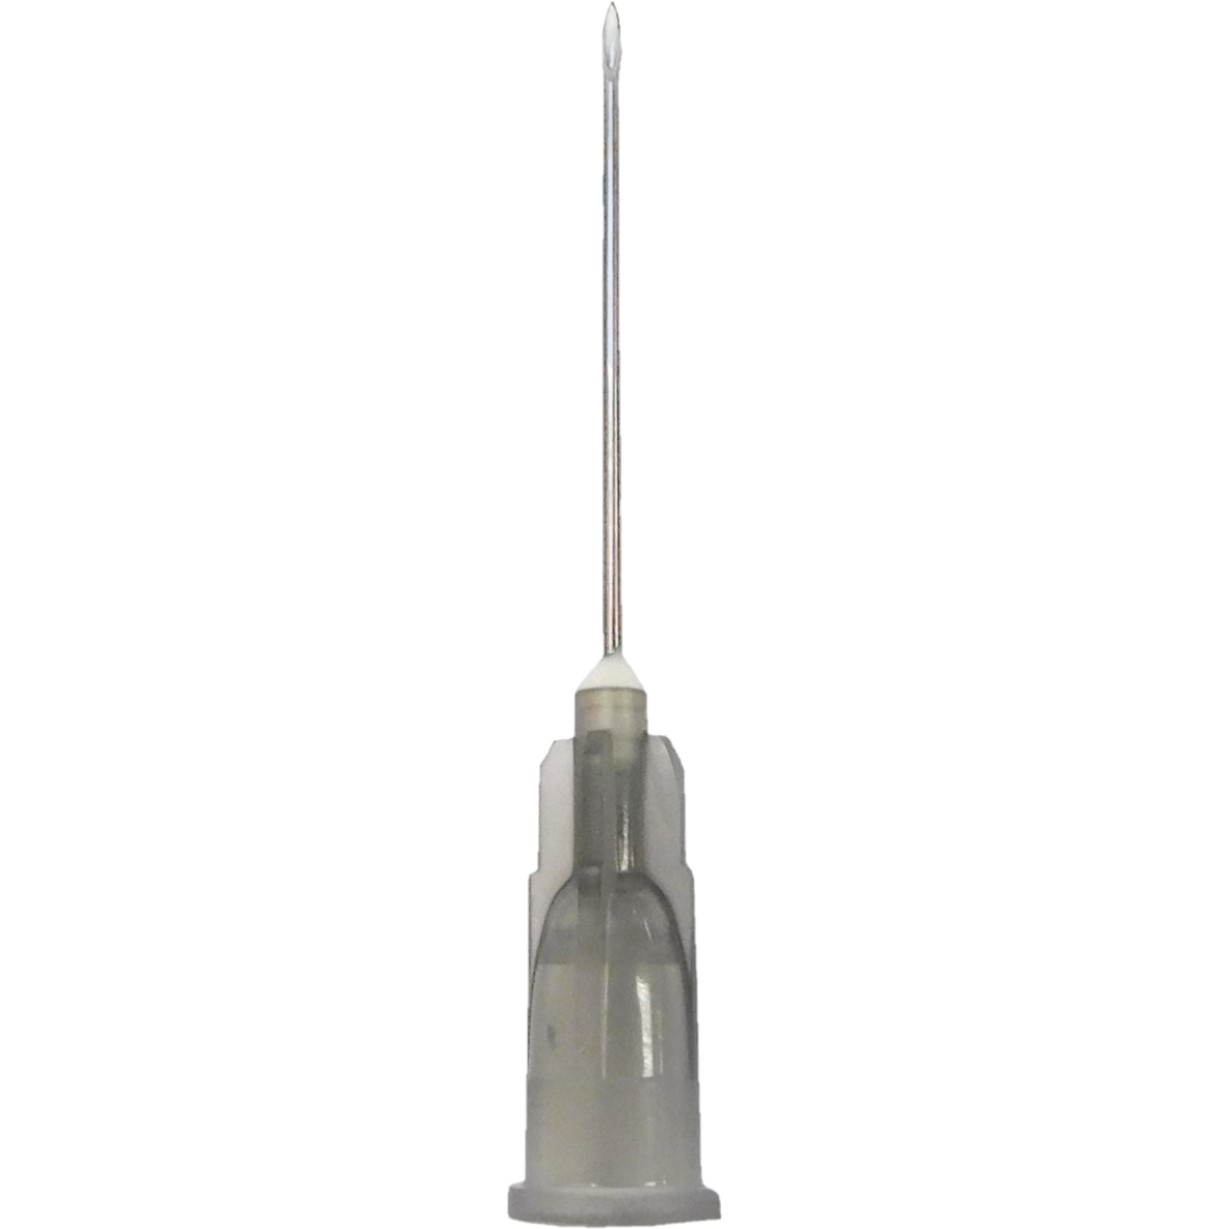 Needle Hypodermic Without Safety 22 Gauge 1 Inch .. .  .  